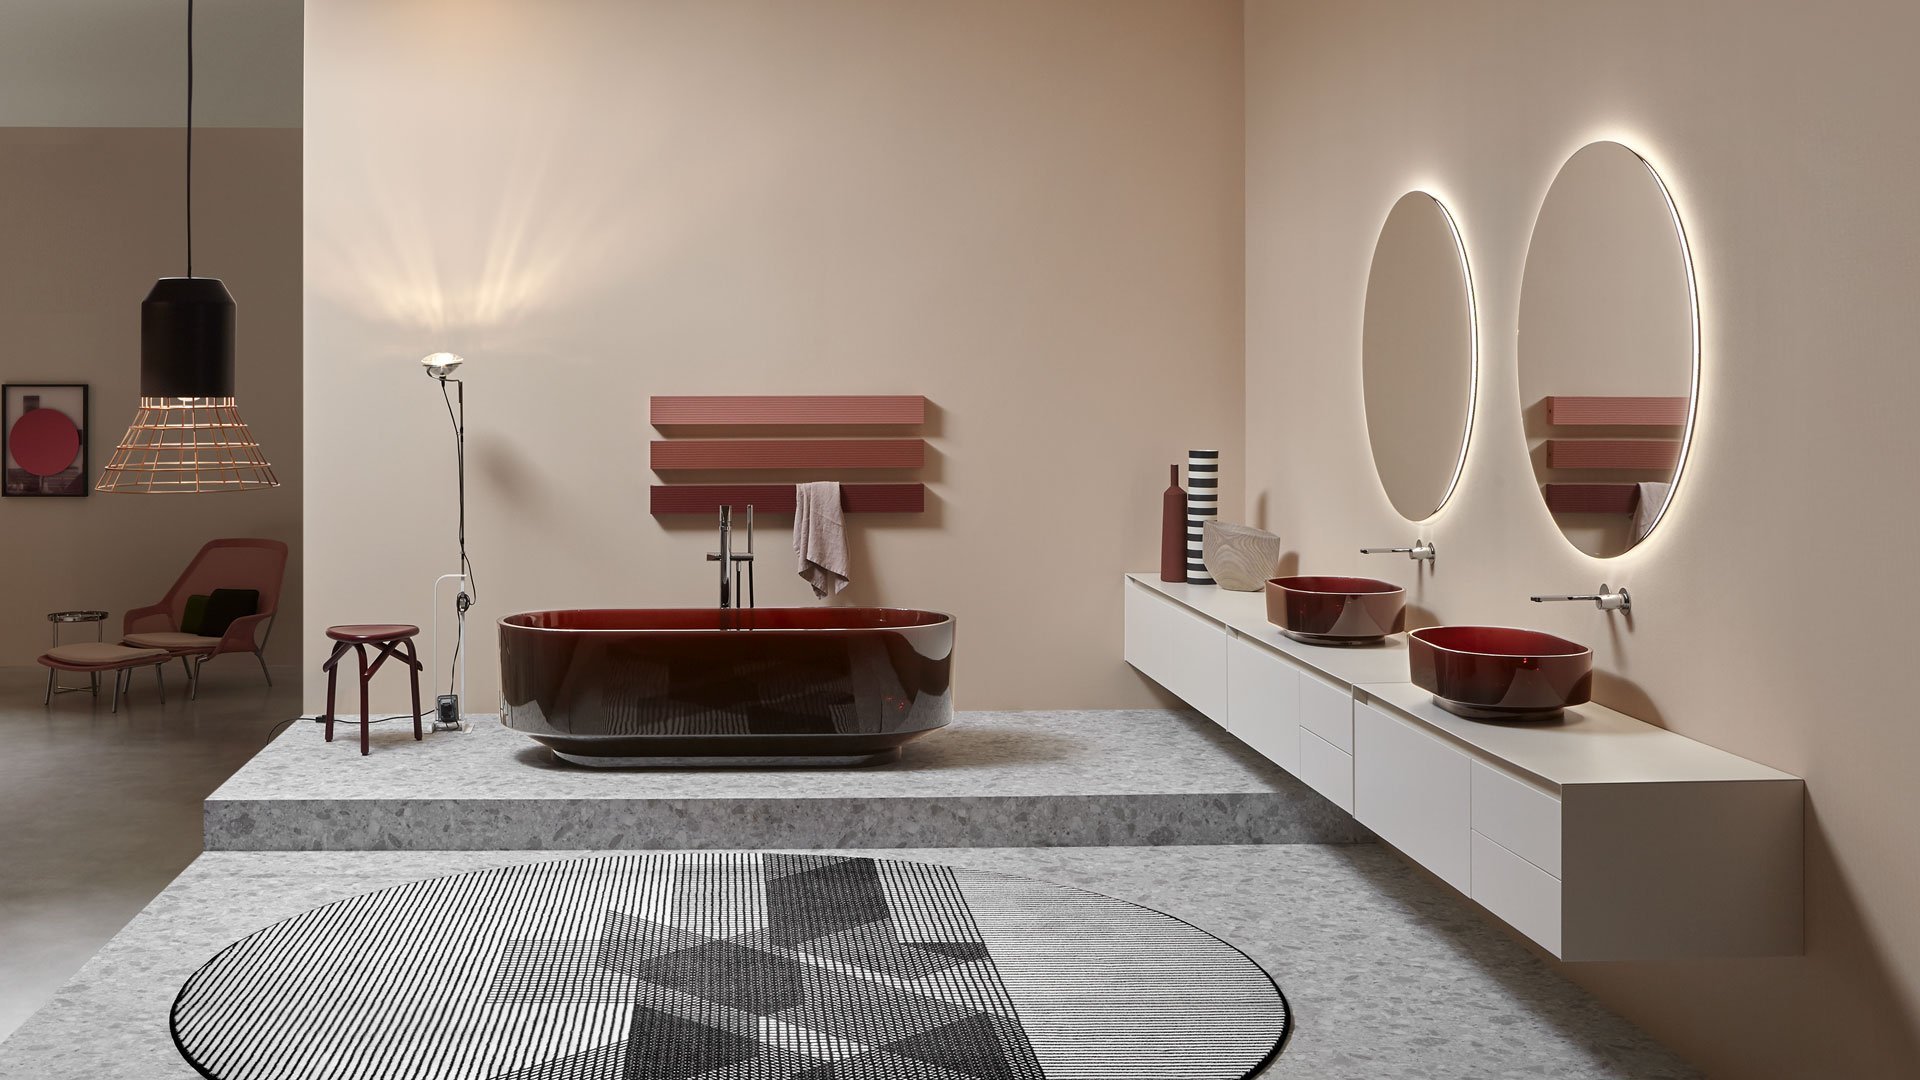 The antoniolupi Borghi collection is enriched with new bathtub | iqd